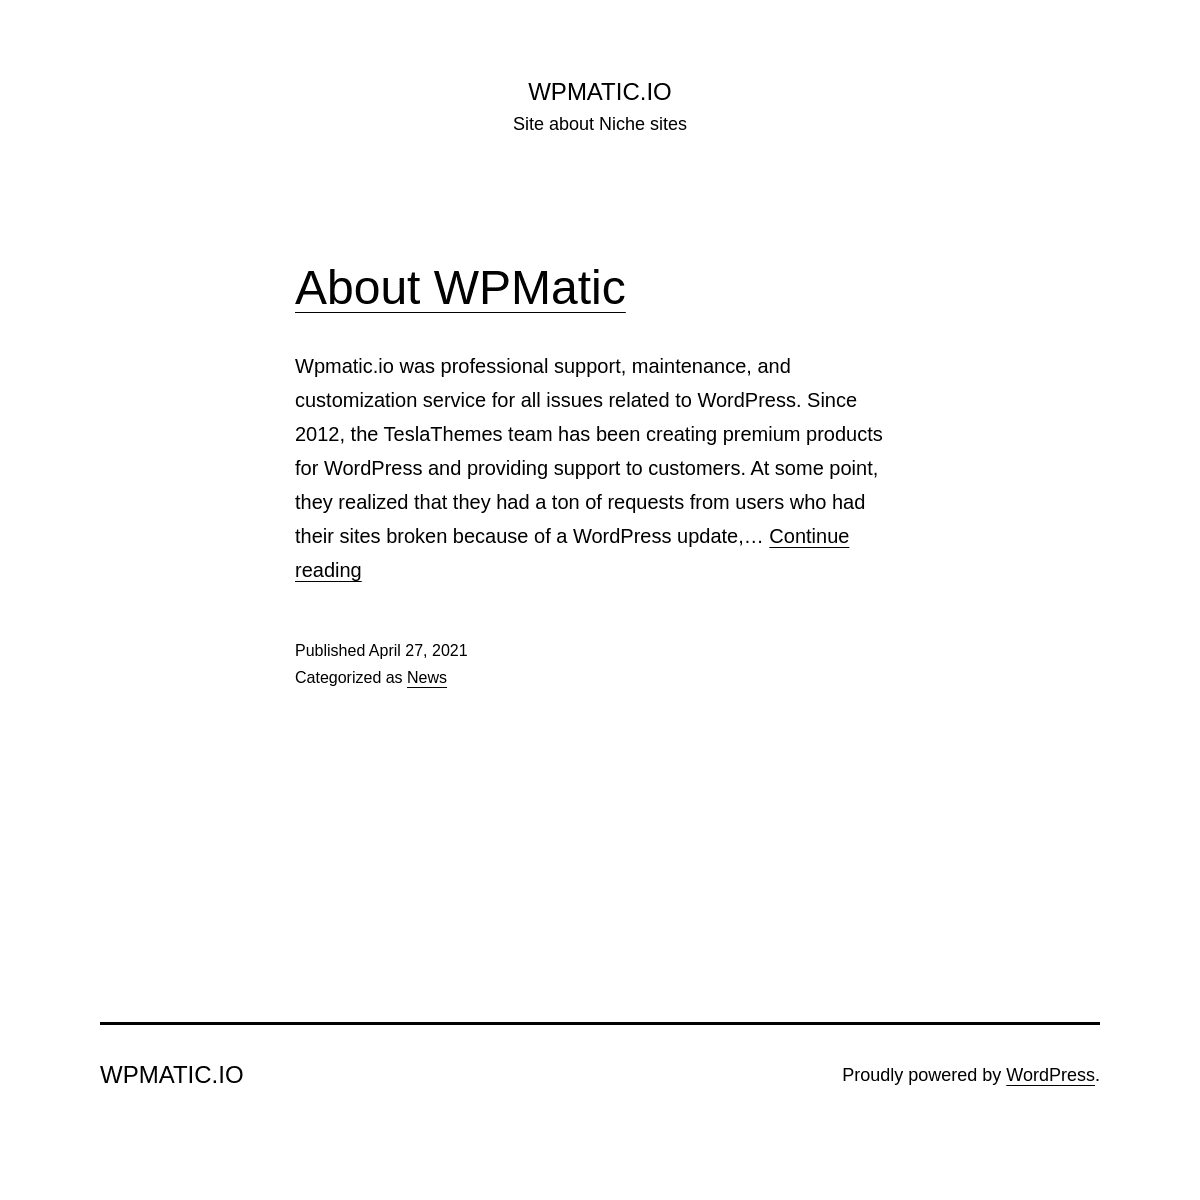 A complete backup of https://wpmatic.io